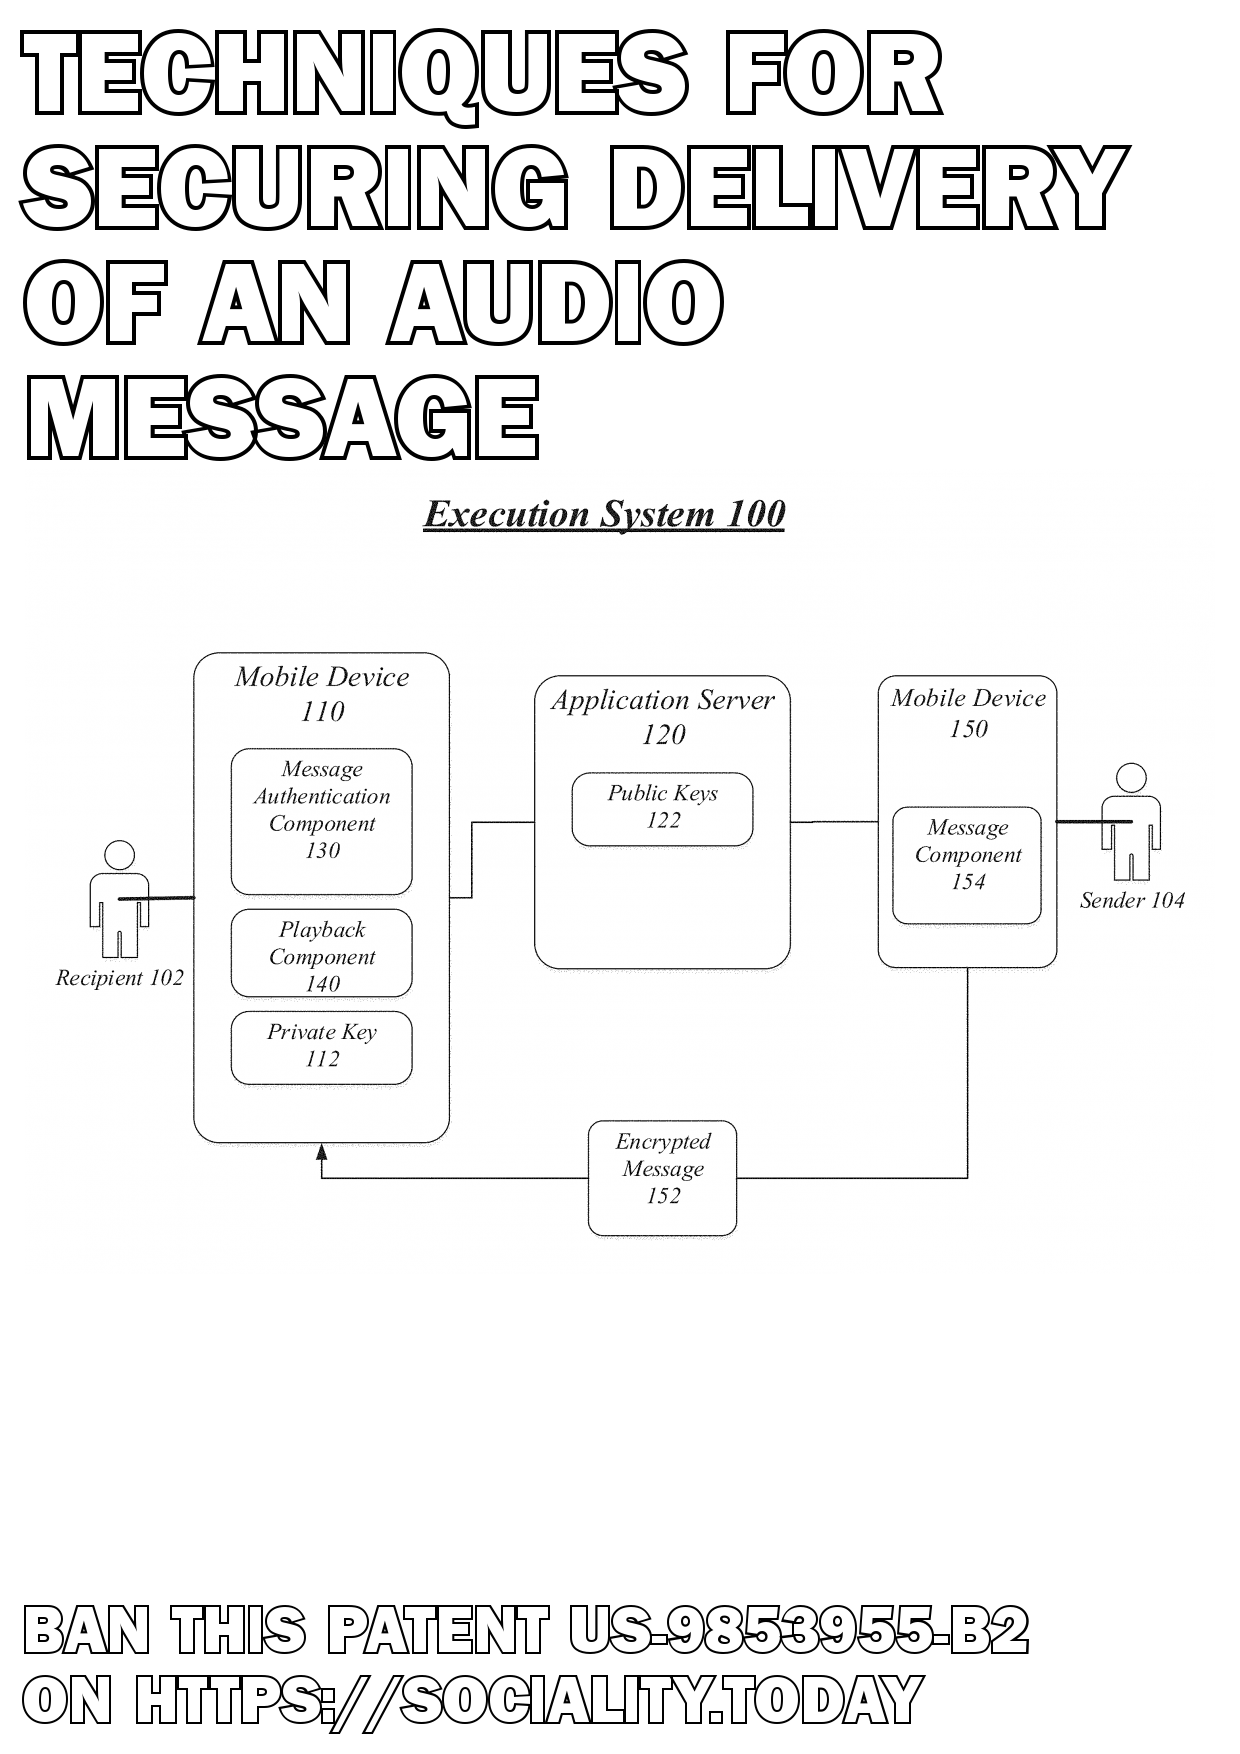 Techniques for securing delivery of an audio message  - US-9853955-B2